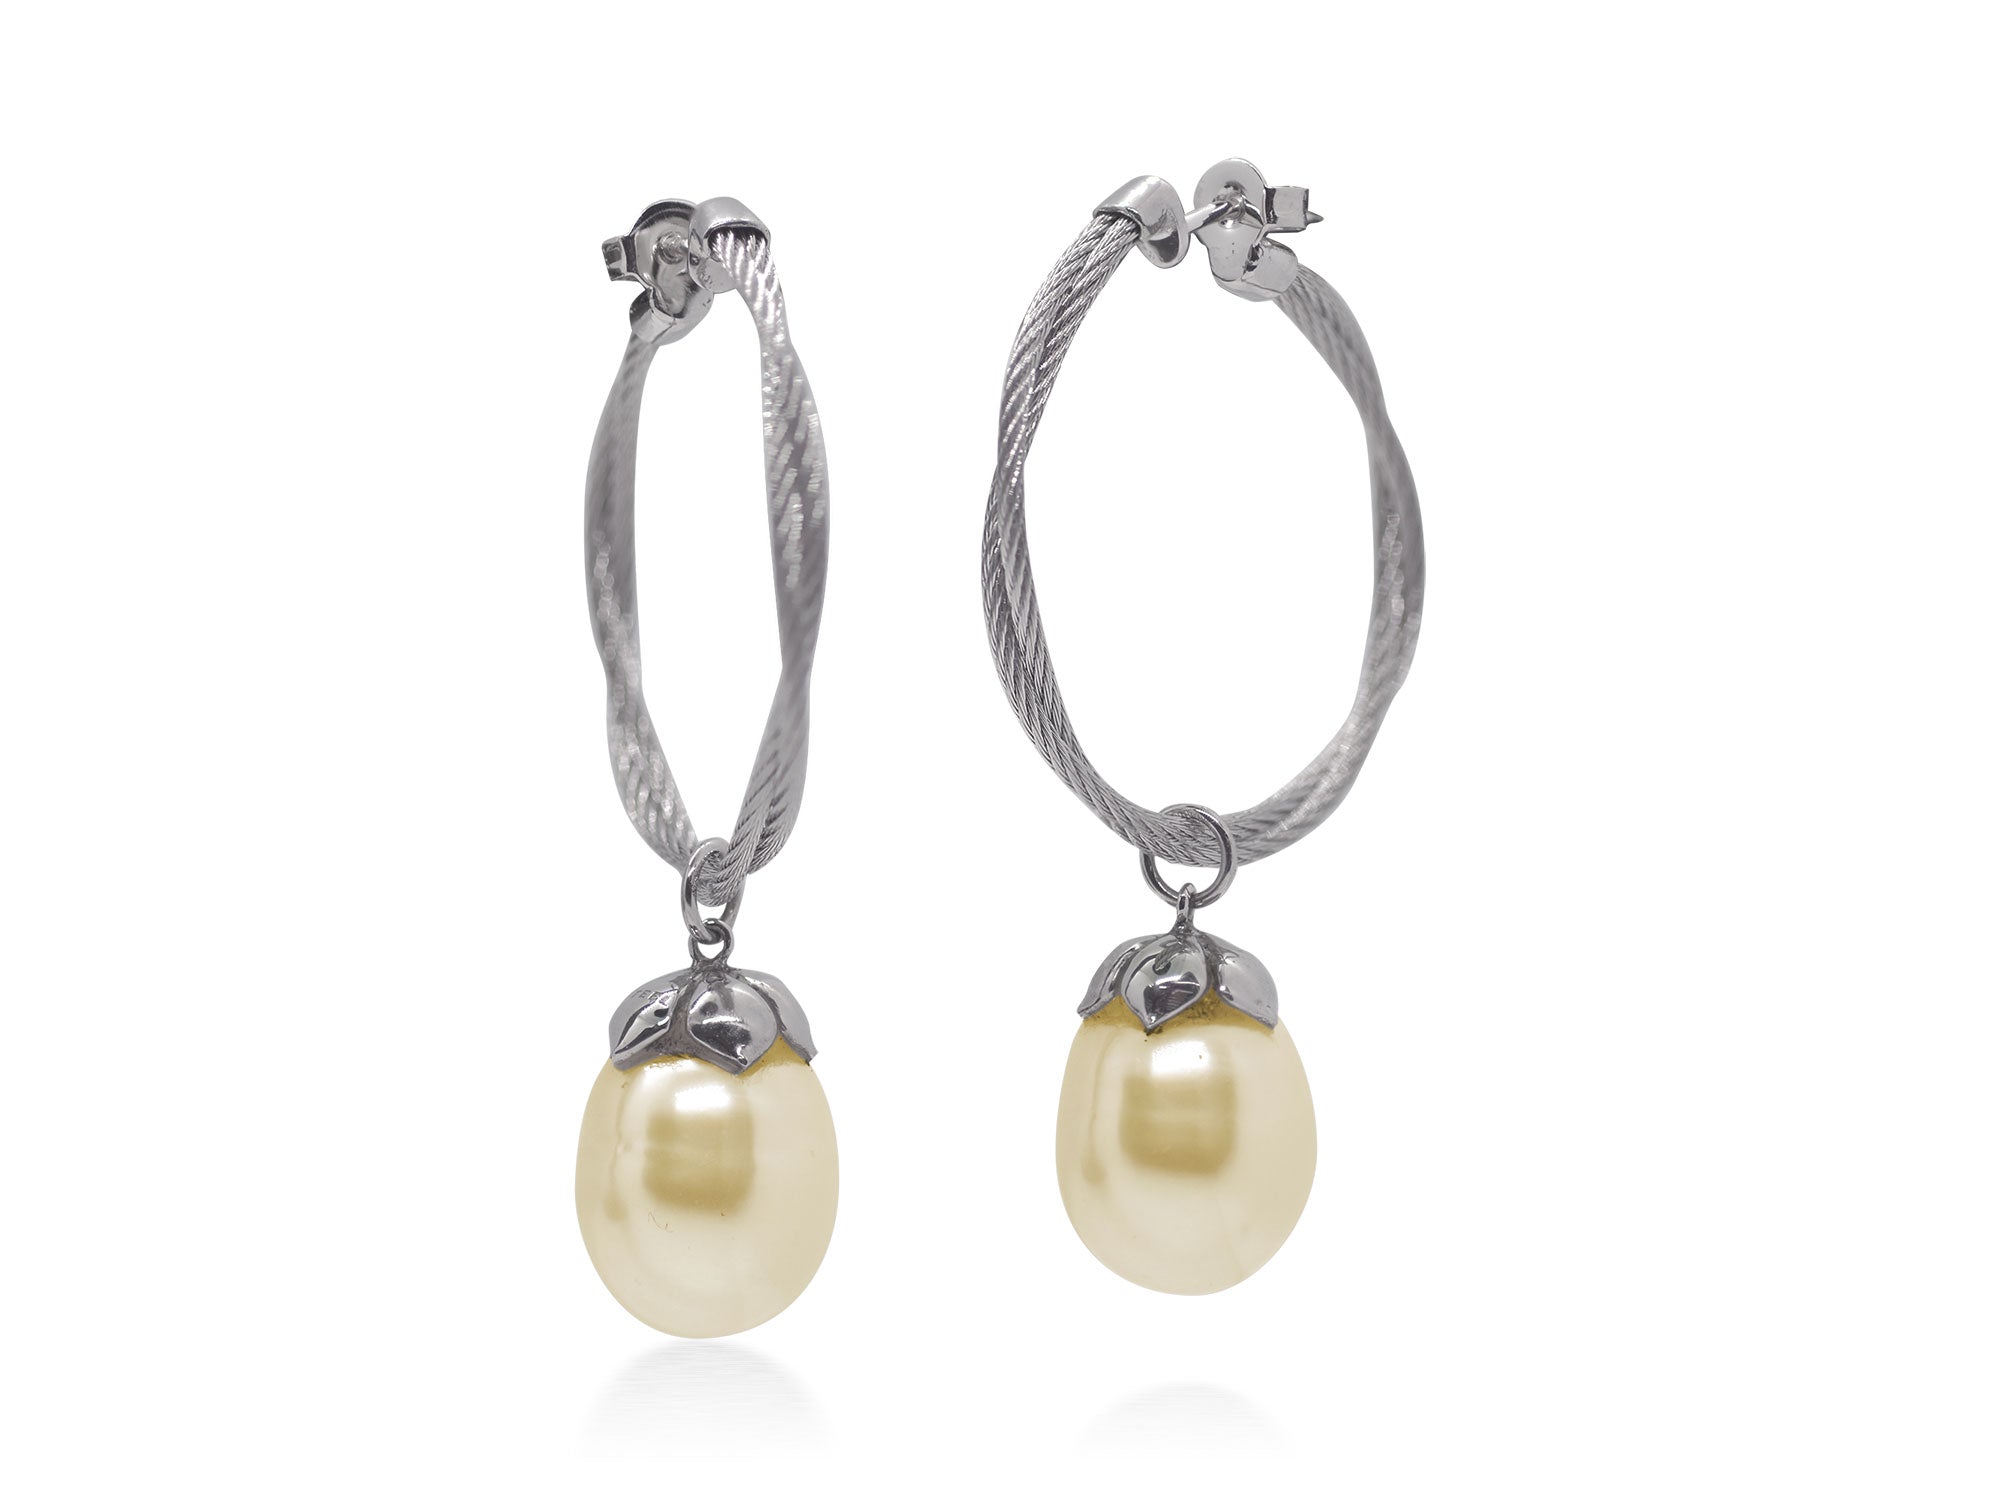 Grey Twisted Cable Hoop Earrings with Yellow South Sea Pearls